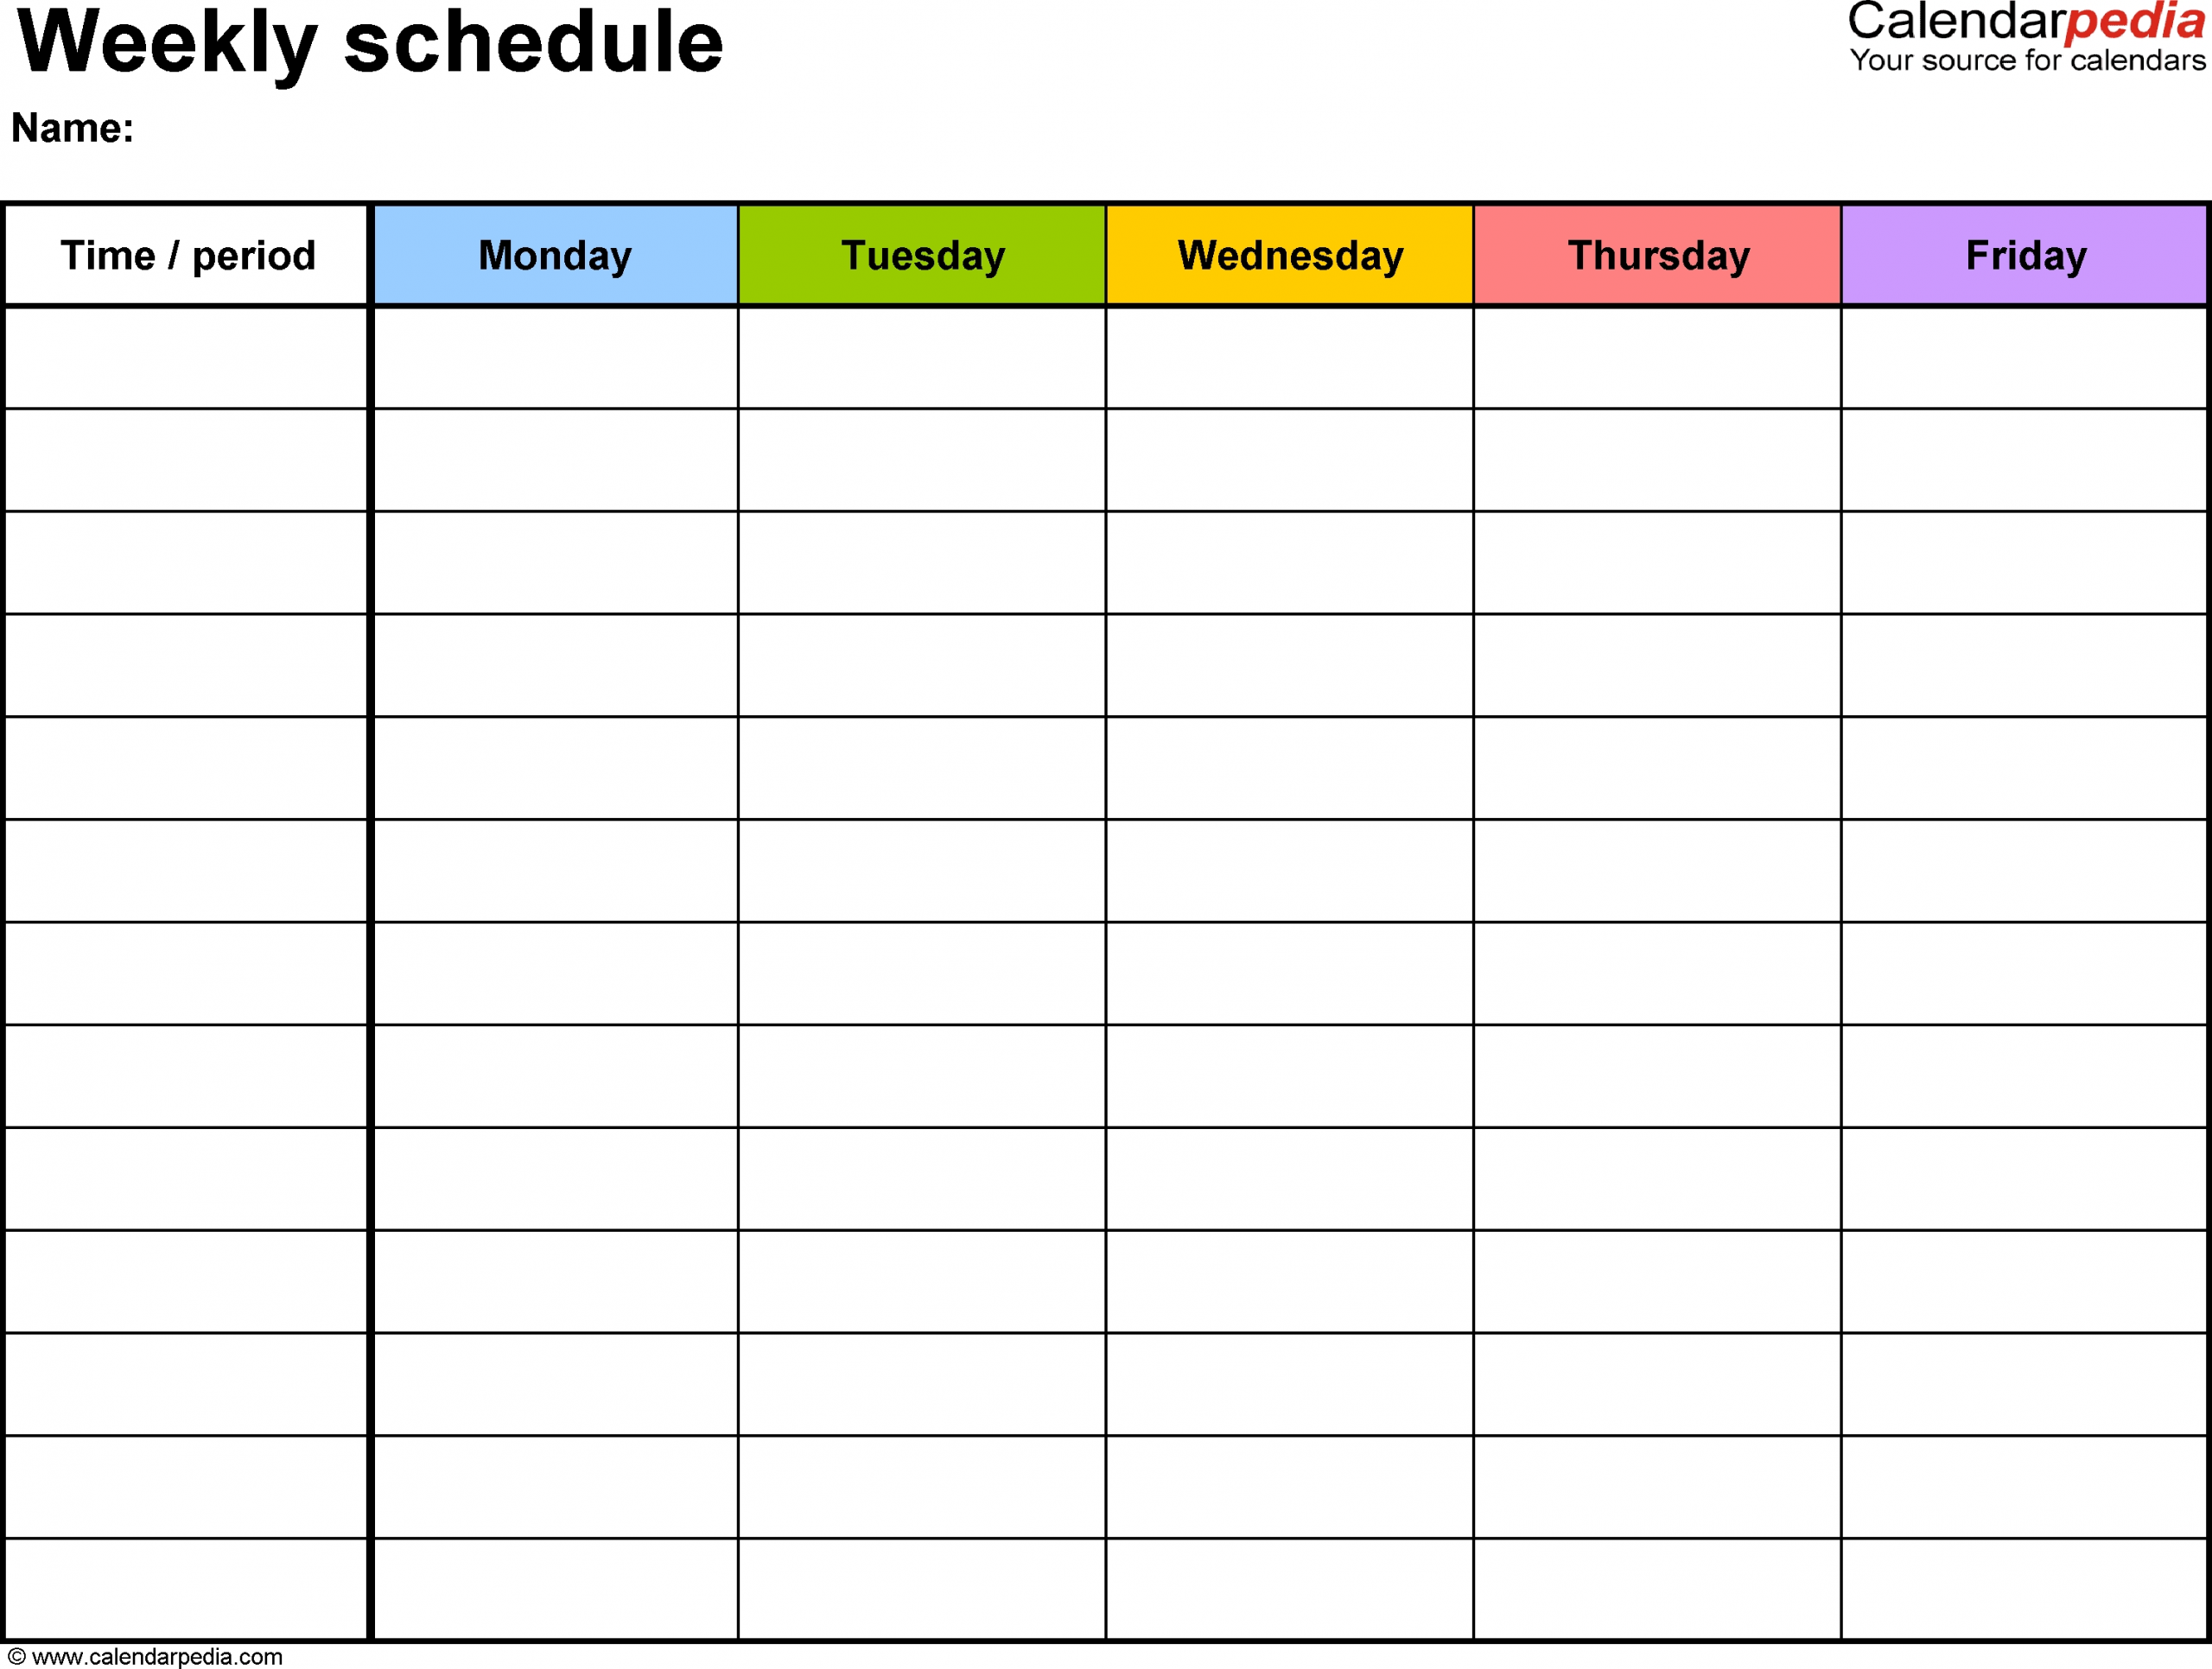 Free Weekly Schedule Templates For Word - 18 Templates throughout Monday Through Friday Weekly Calendar